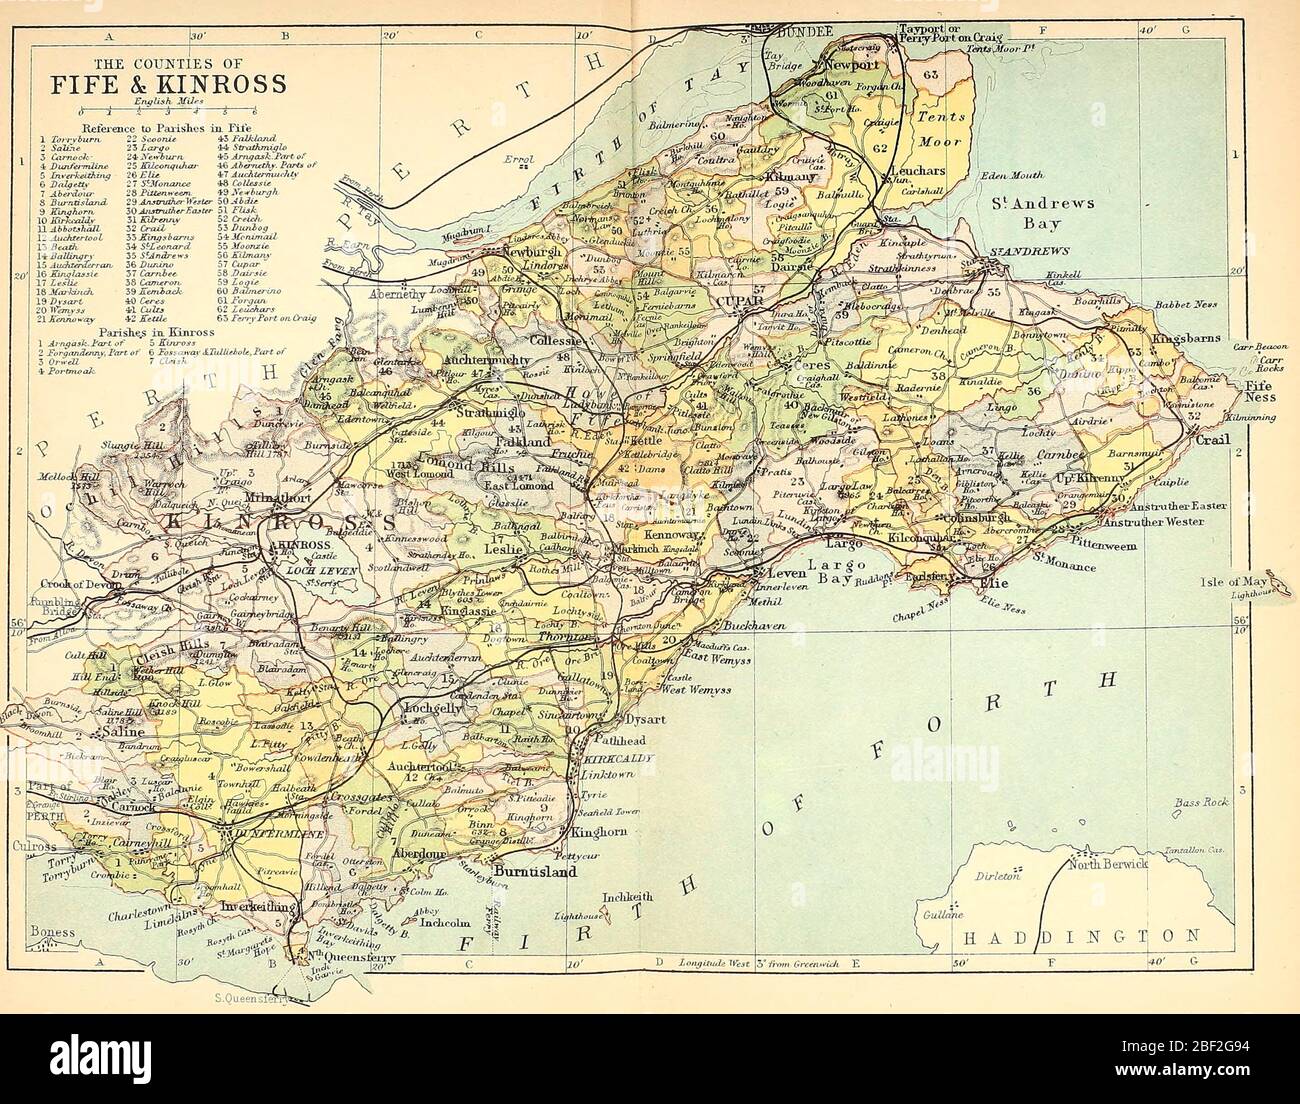 Map of The Counties of Fife and Kinross, Scotland, 1891 Stock Photo